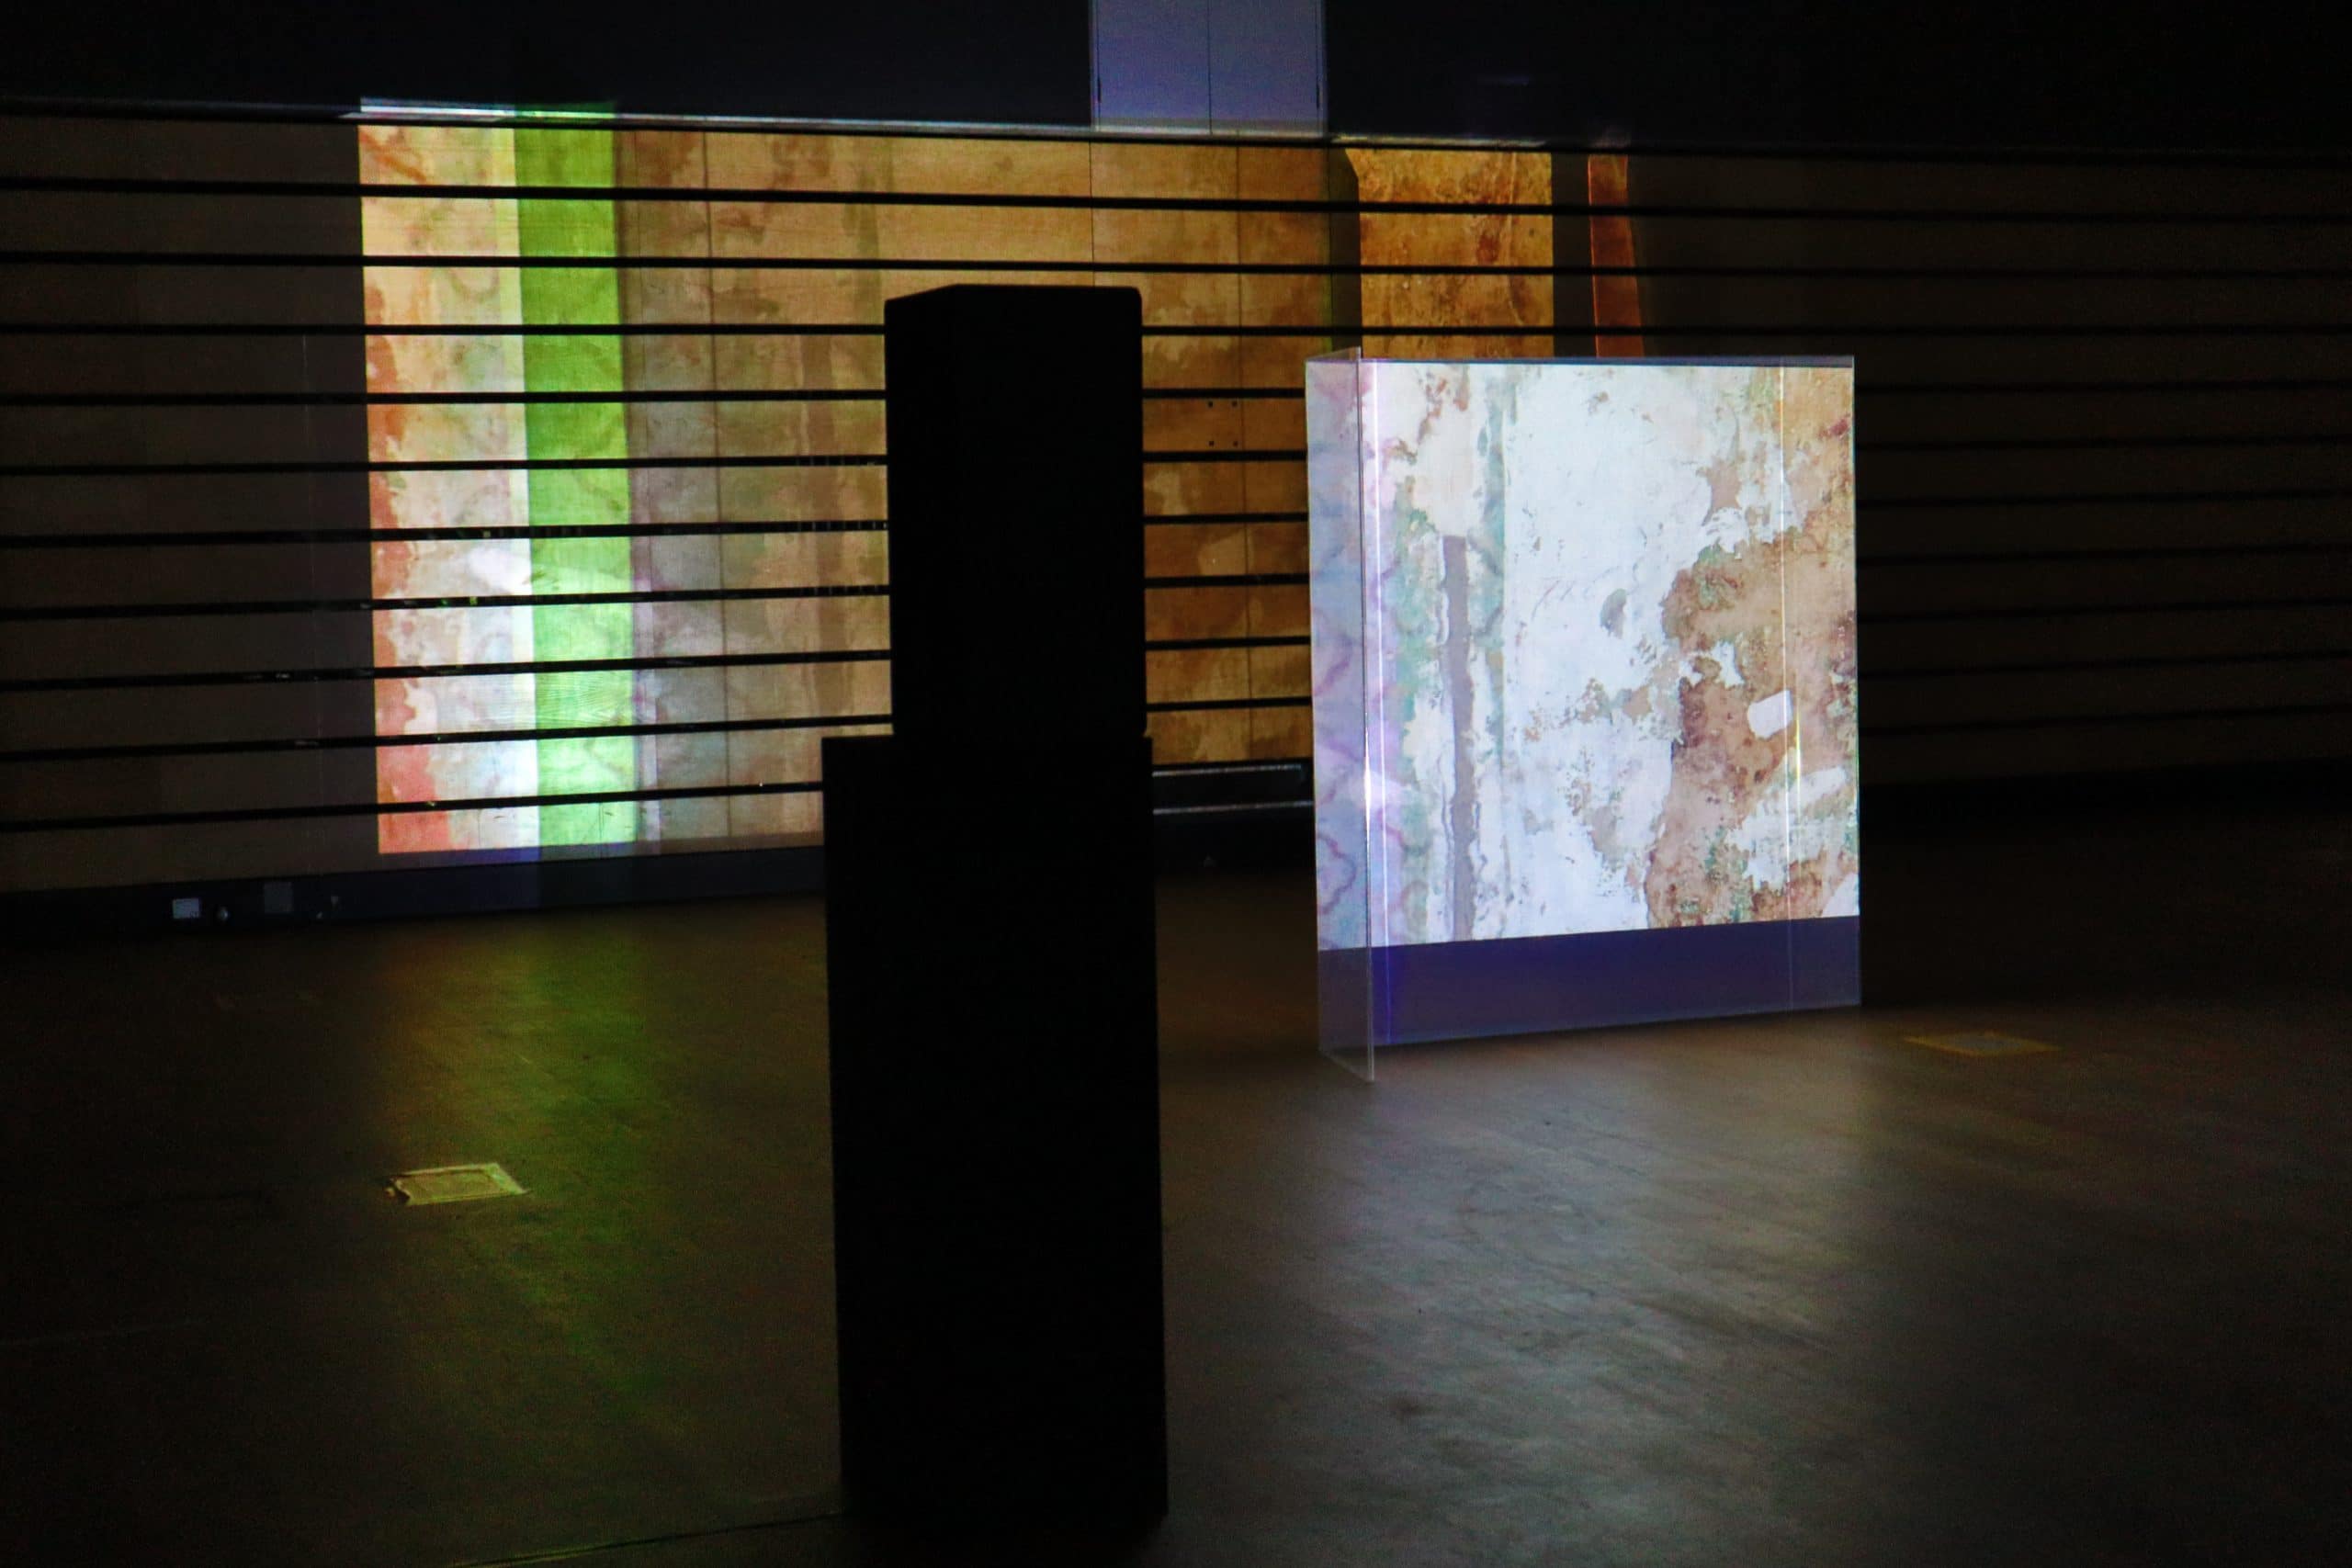 Gary Finnegan, Without buildings and houses - Installation/ digital video, 9m 28sec, 2021